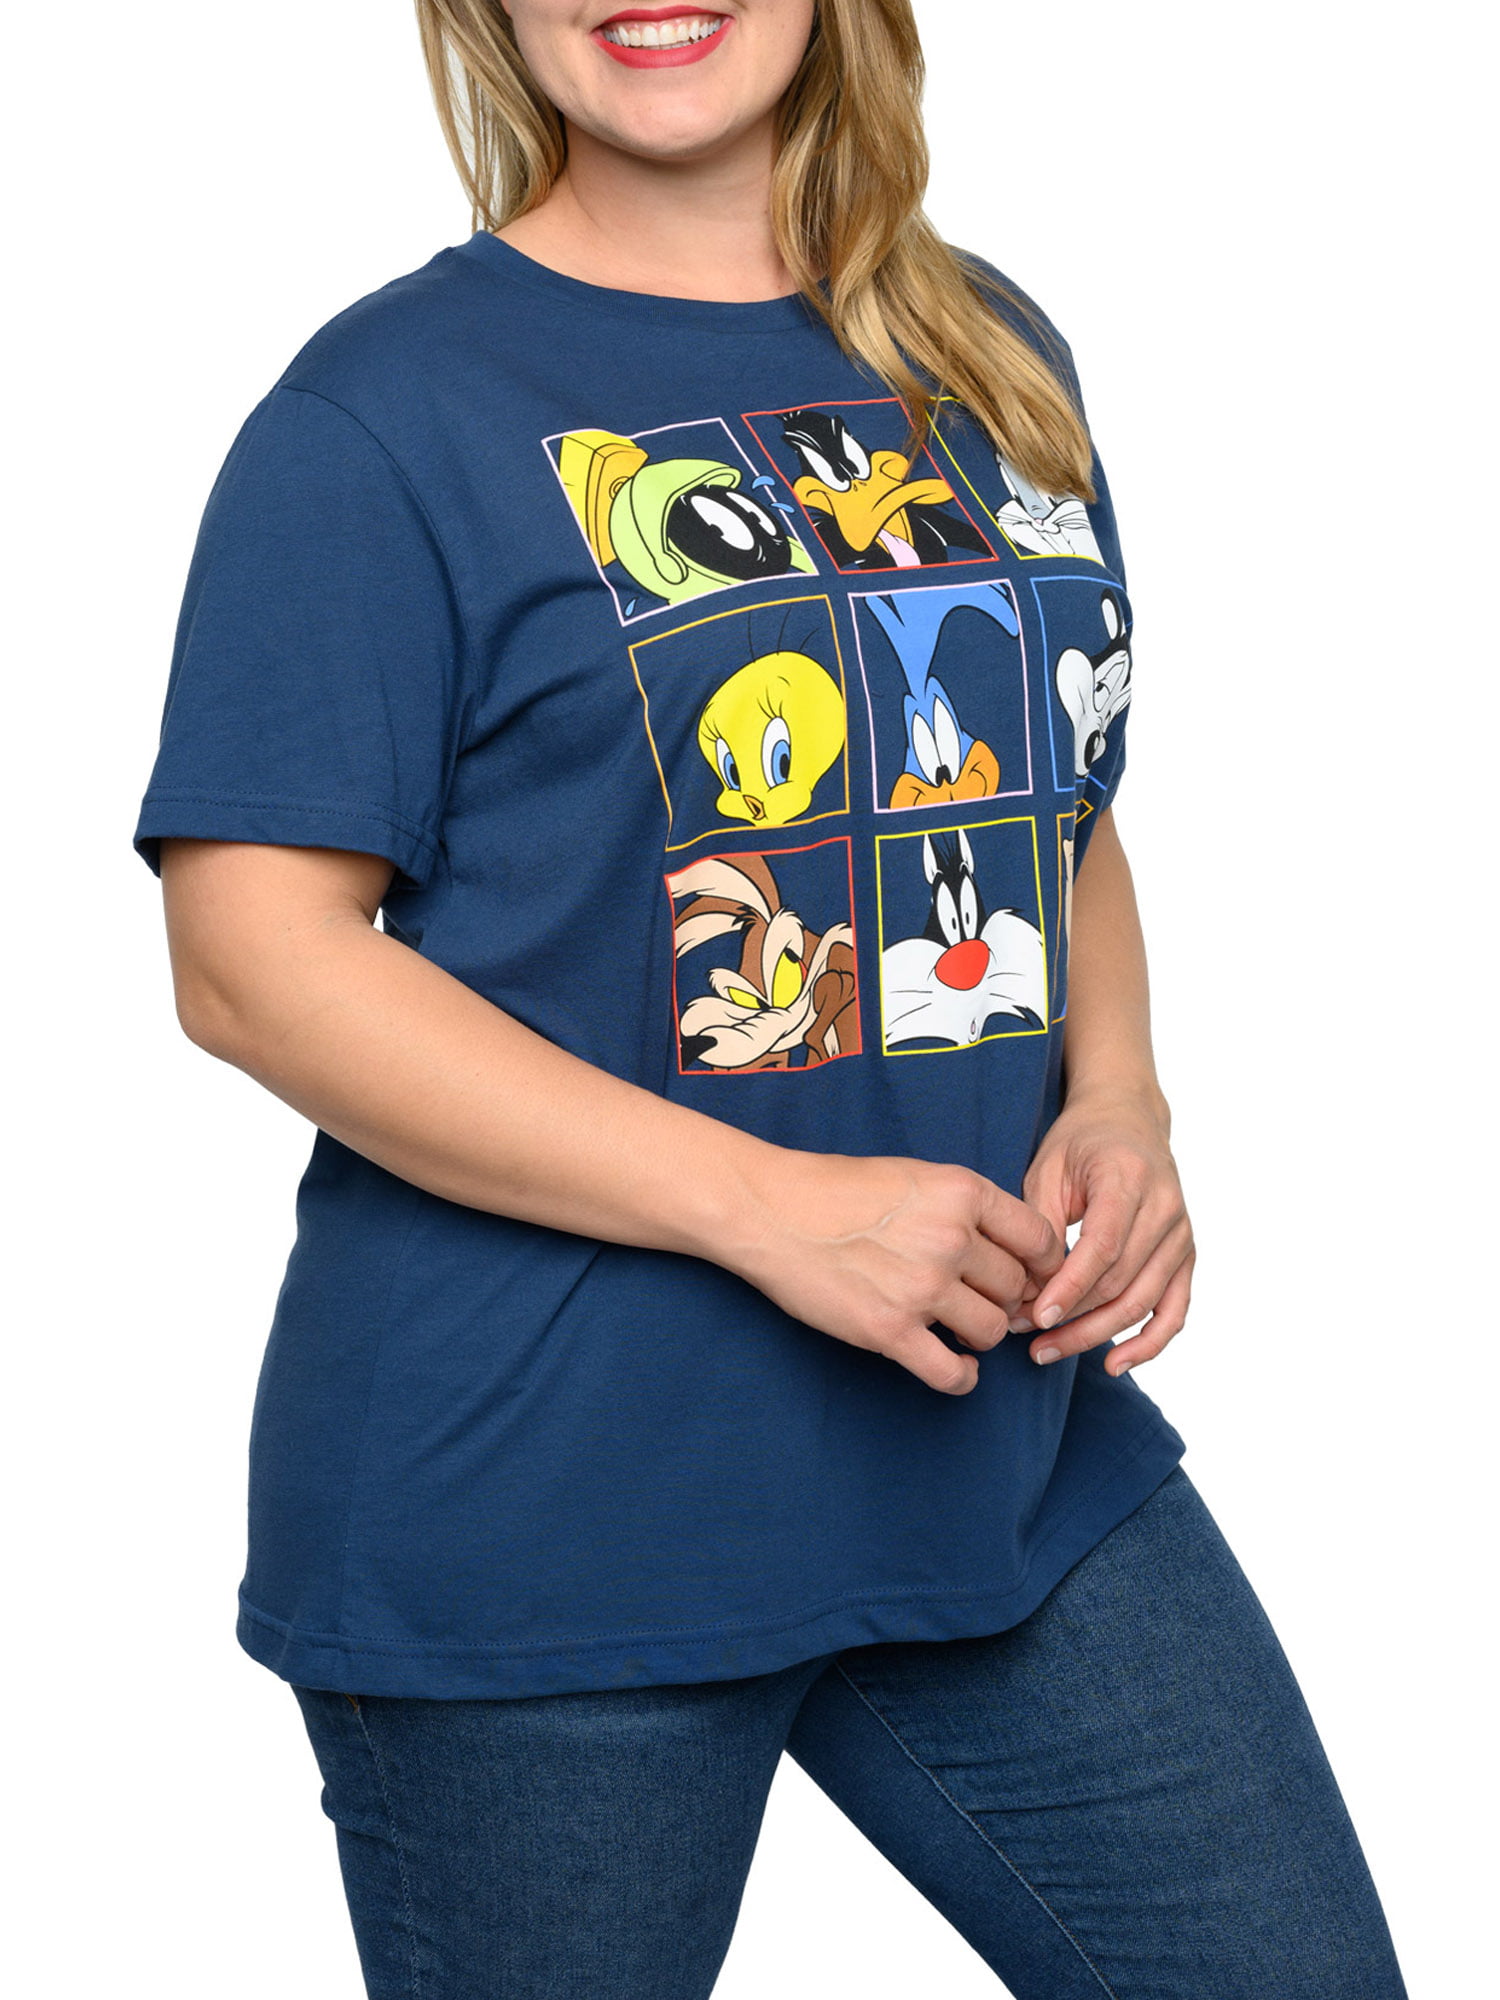 Women\'s Looney Tunes T-Shirt Plus Size Bugs Bunny Blue Daffy Sylvester  Tweety